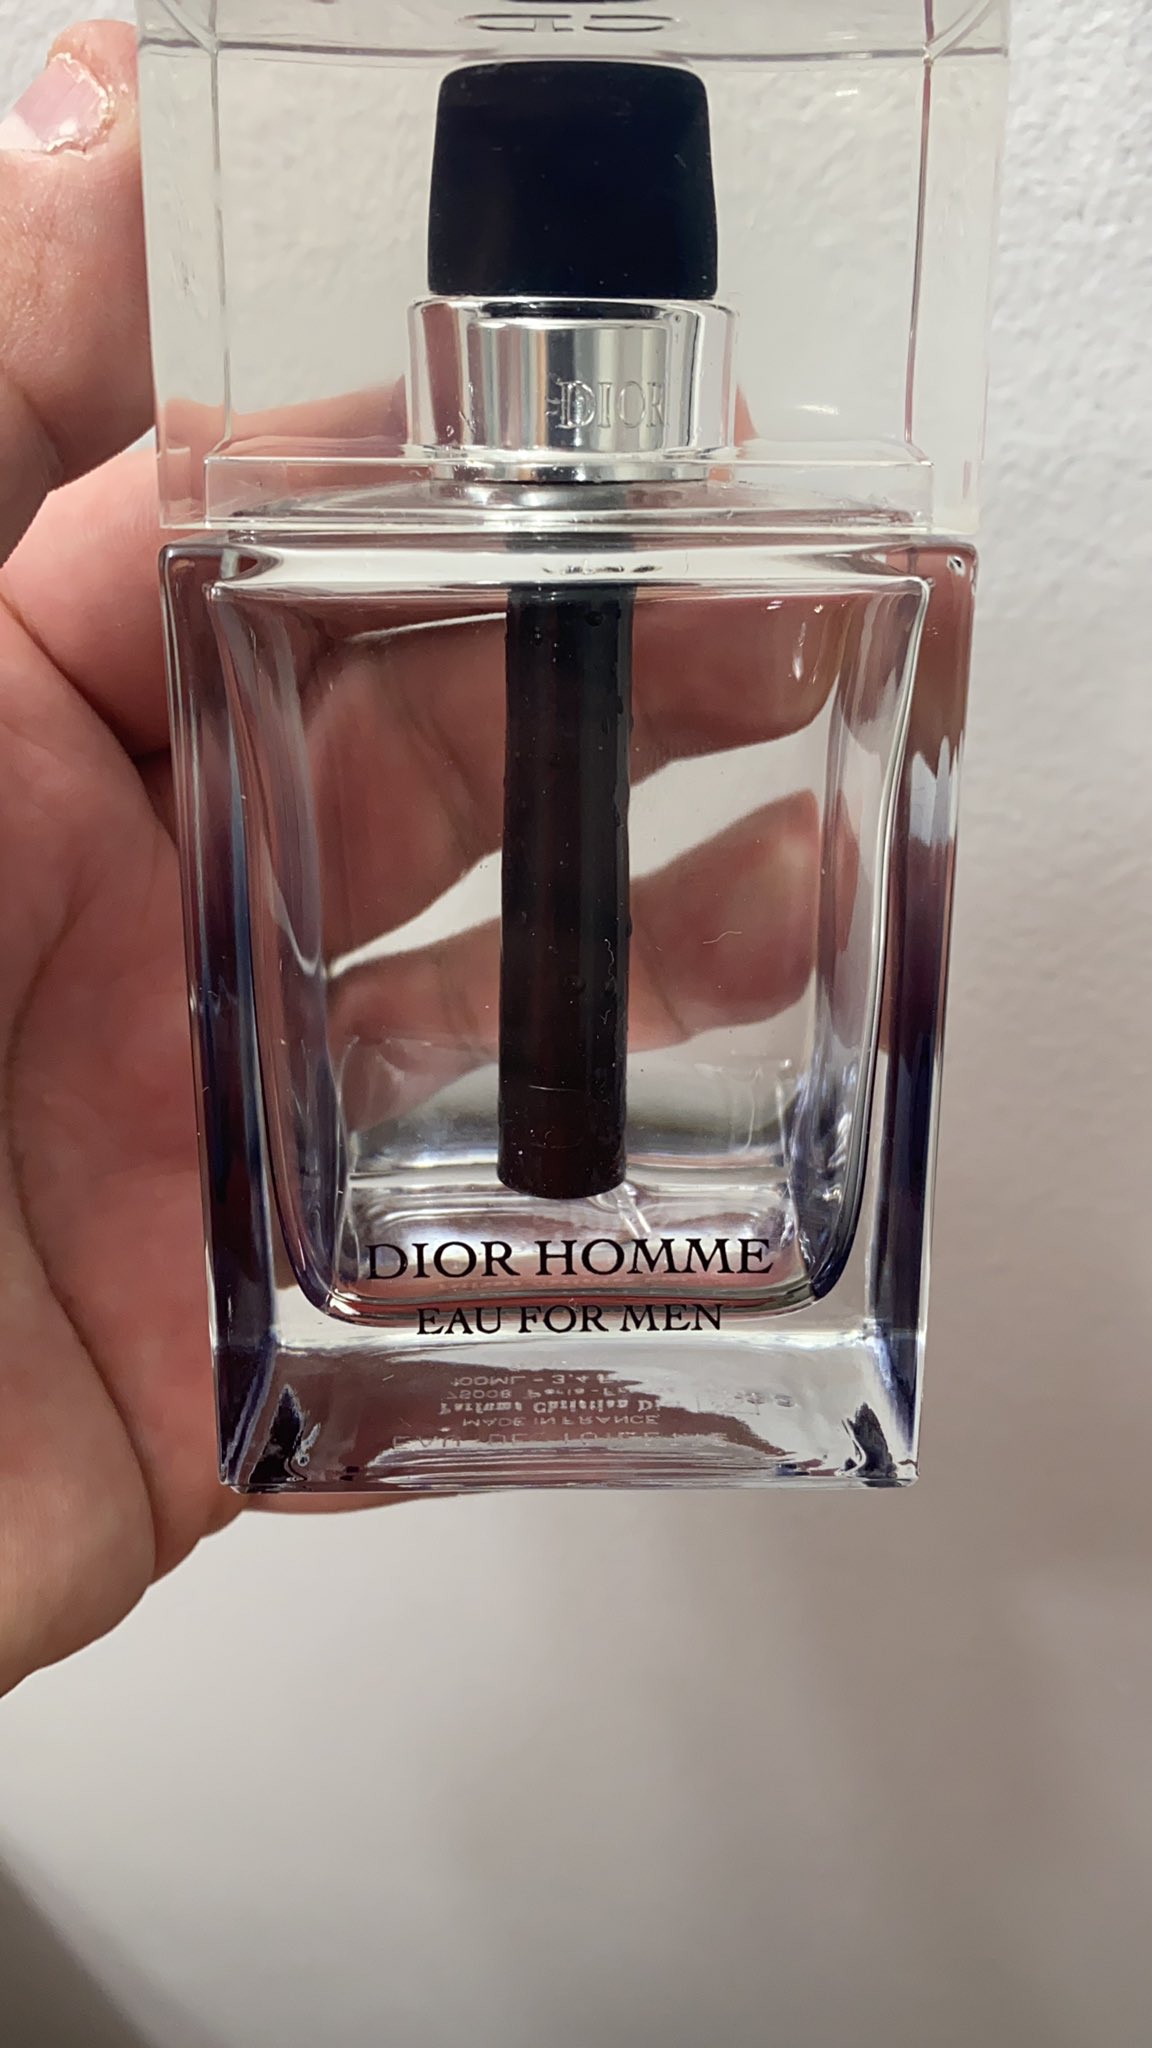 Josh Gleave on Twitter: "Hey internet I'm looking for Dior Homme EAU FOR MEN.  Not sport. Not Cologne. Gotta be that Eau. Anyone have any good leads it  seems sold out or